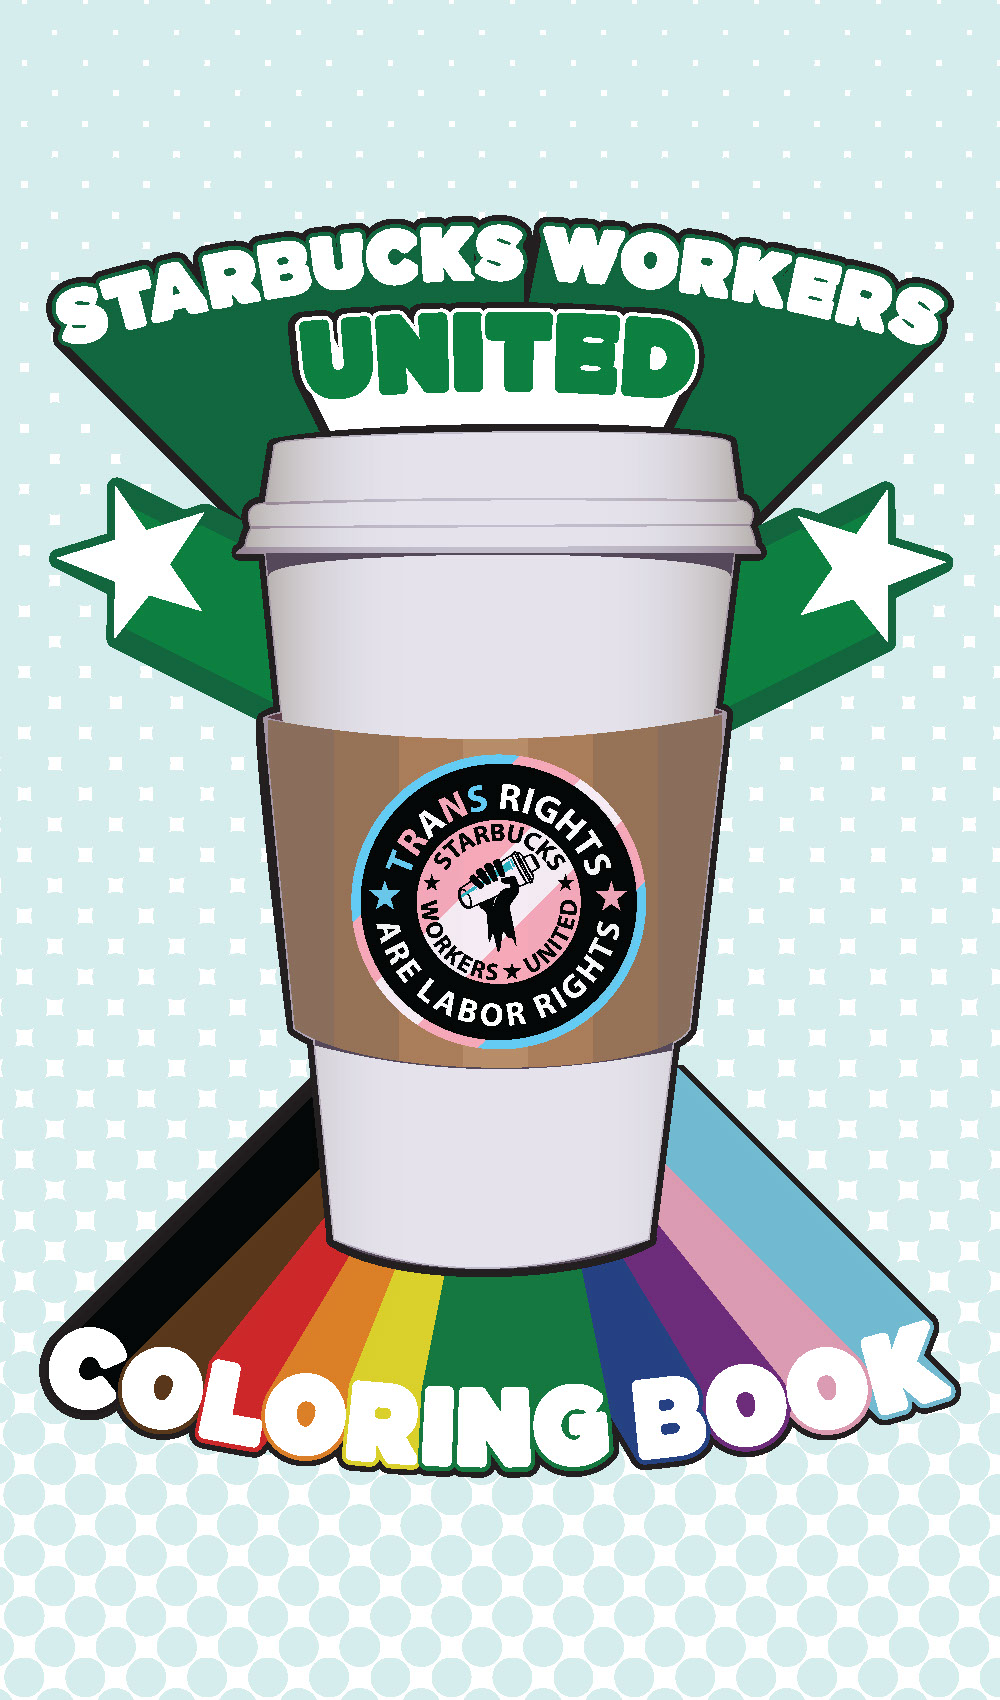 Starbucks Workers United Coloring Book rendition image